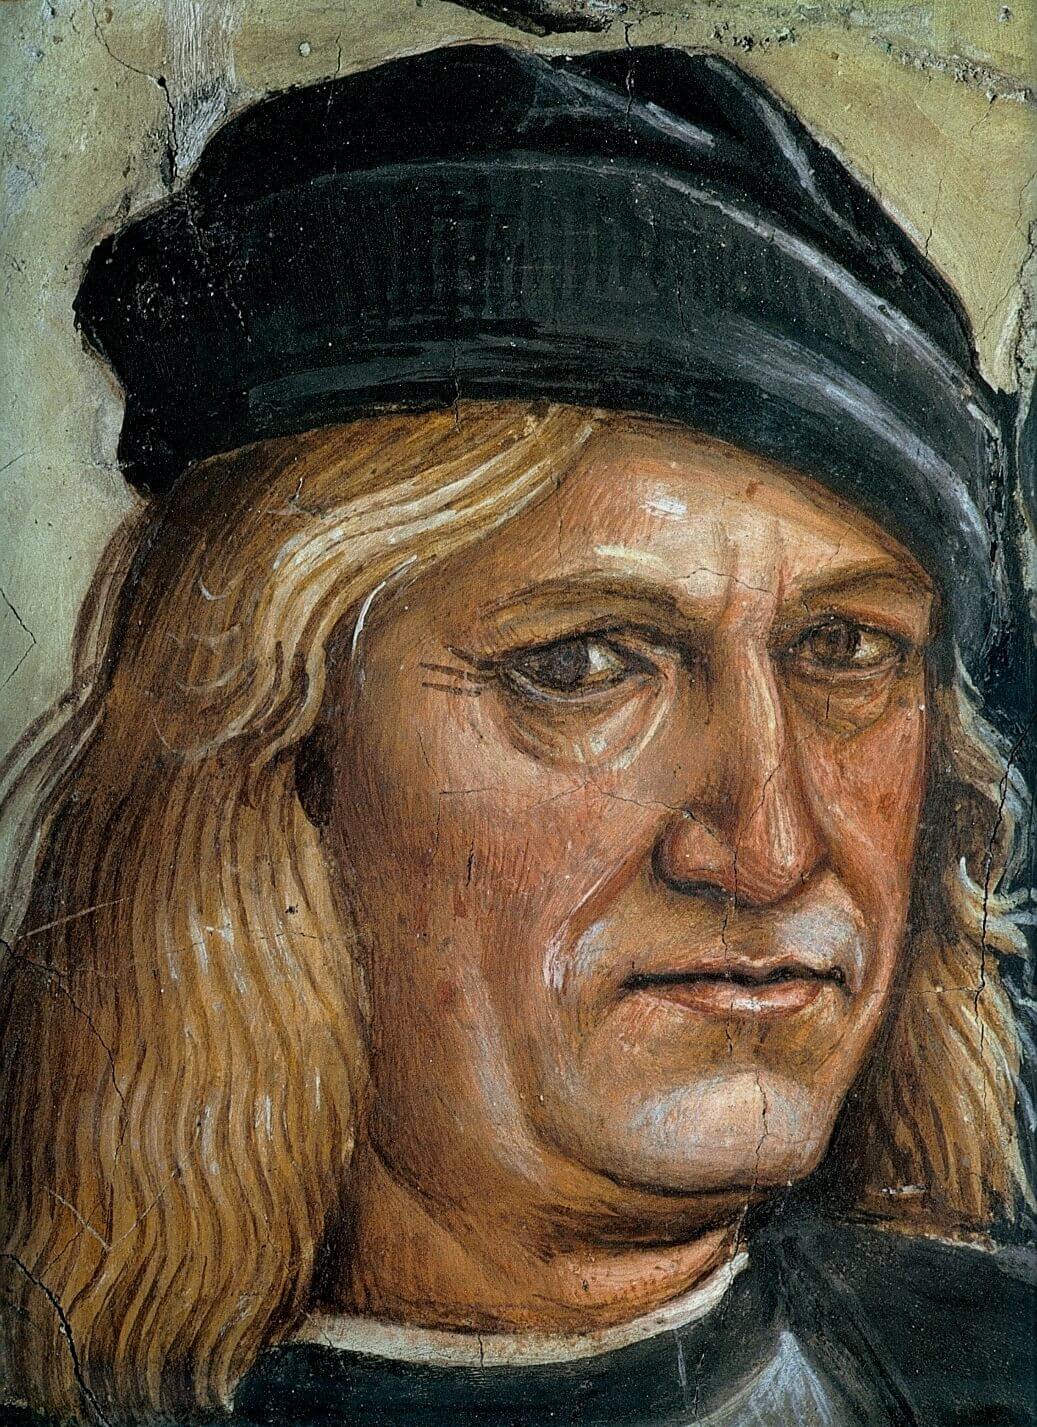 Luca Signorelli (Italian Painter) Biography and Works